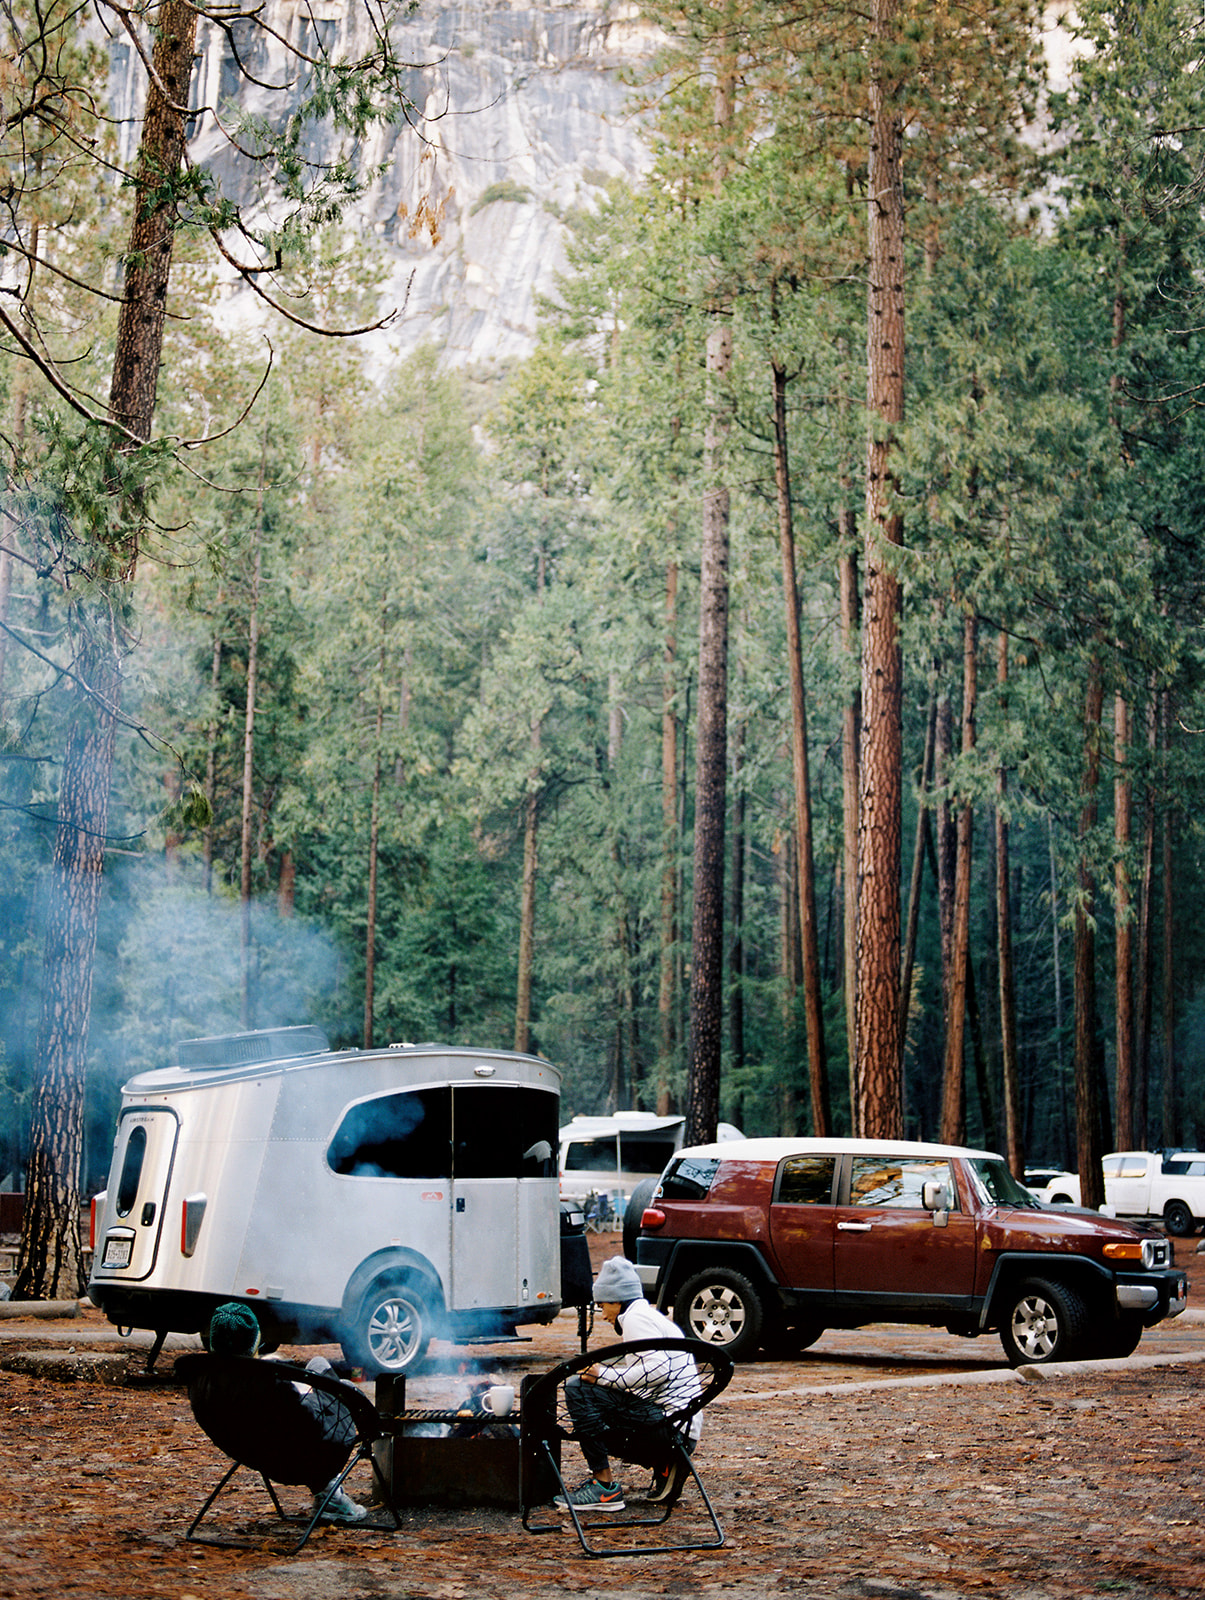 Our airstream and car parked in our campground at Yosemite National Park. We were surrounded by the campfire on this cold November day.